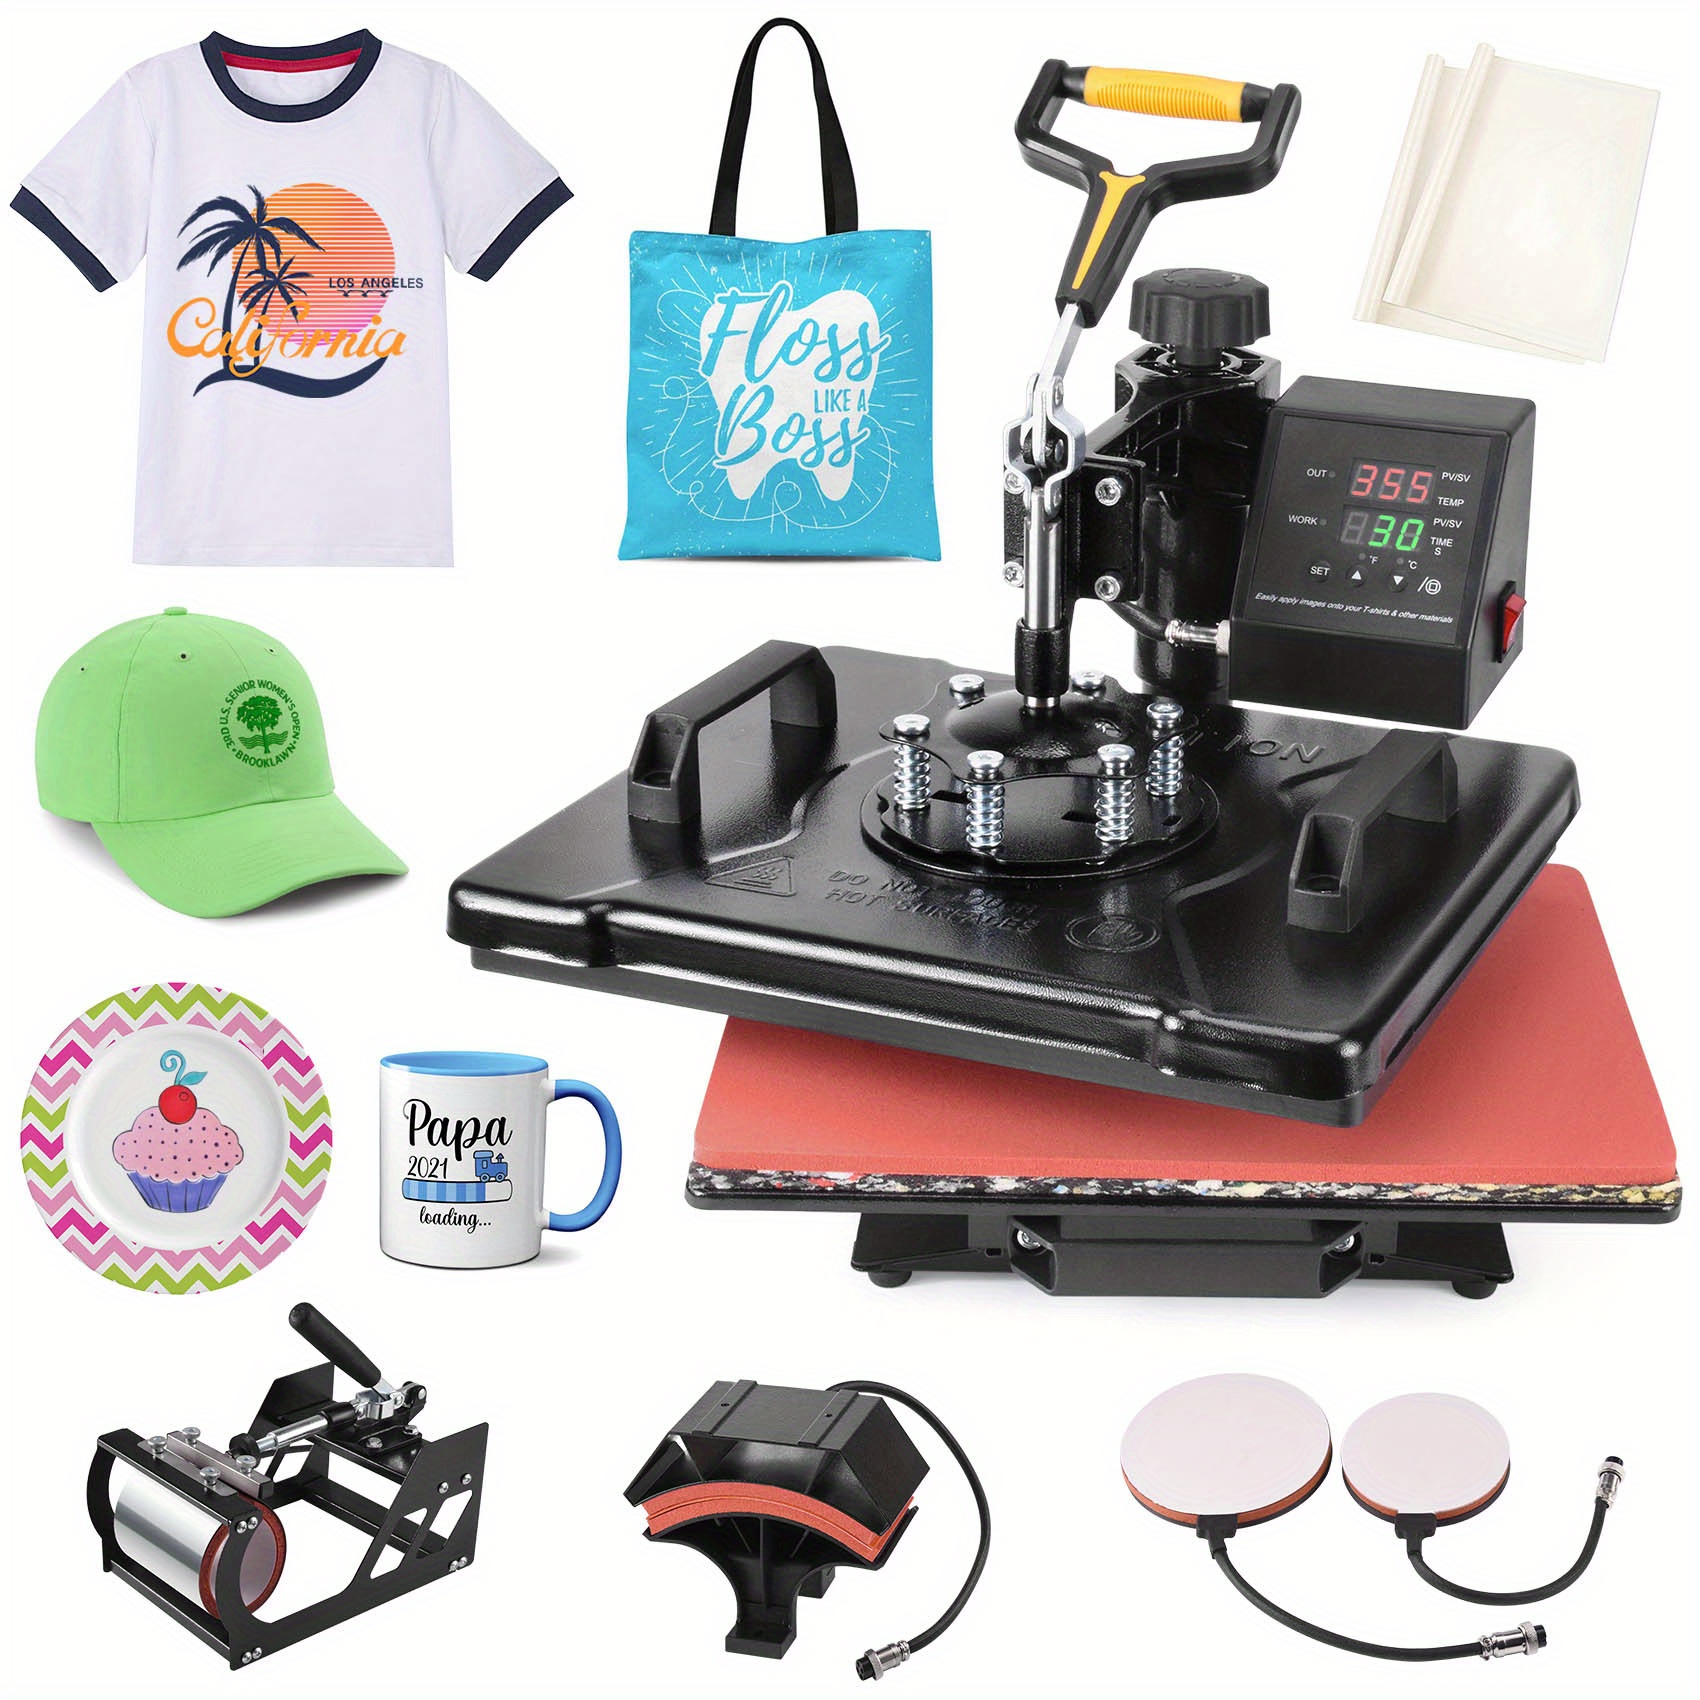 

Heat Press Machine 12x15 Inch 5 In 1 Combo Digital Multifunctional Sublimation Heat Transfer Machine 360 Degree Rotation For T-shirts, Mugs, Hats, Plates, And Caps